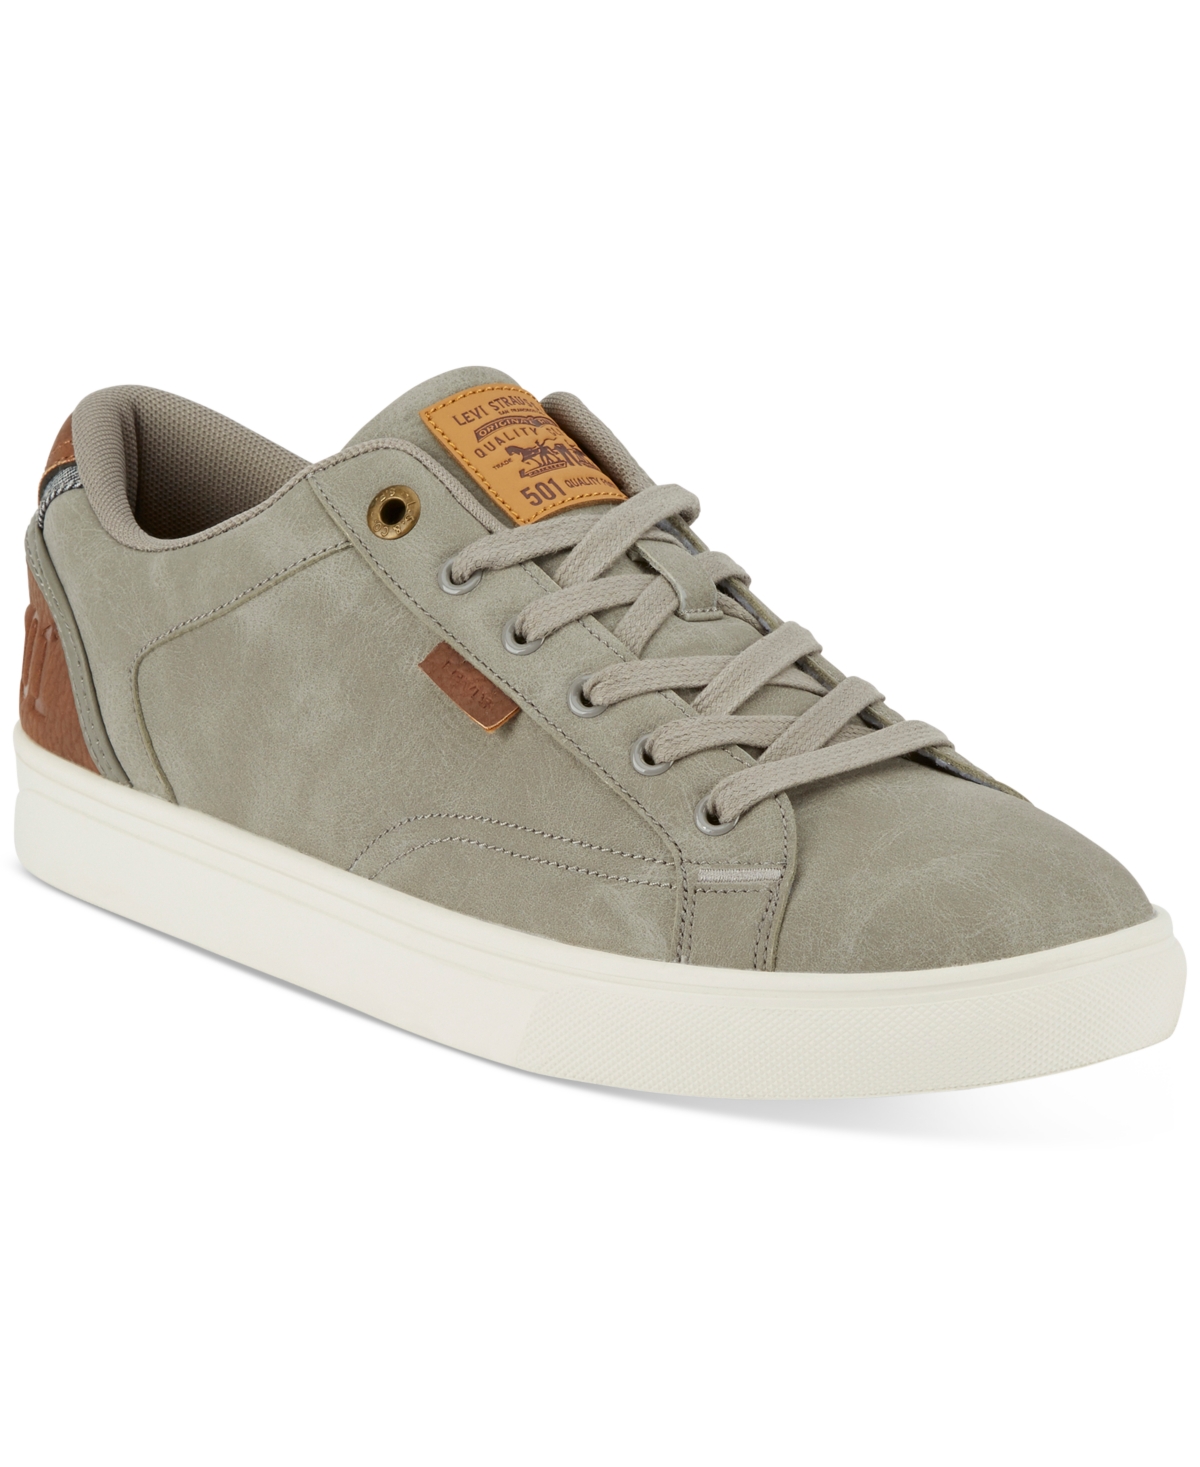 UPC 191605775483 product image for Levi's Men's Jeffrey 501 Waxed Faux-Leather Sneakers Men's Shoes | upcitemdb.com